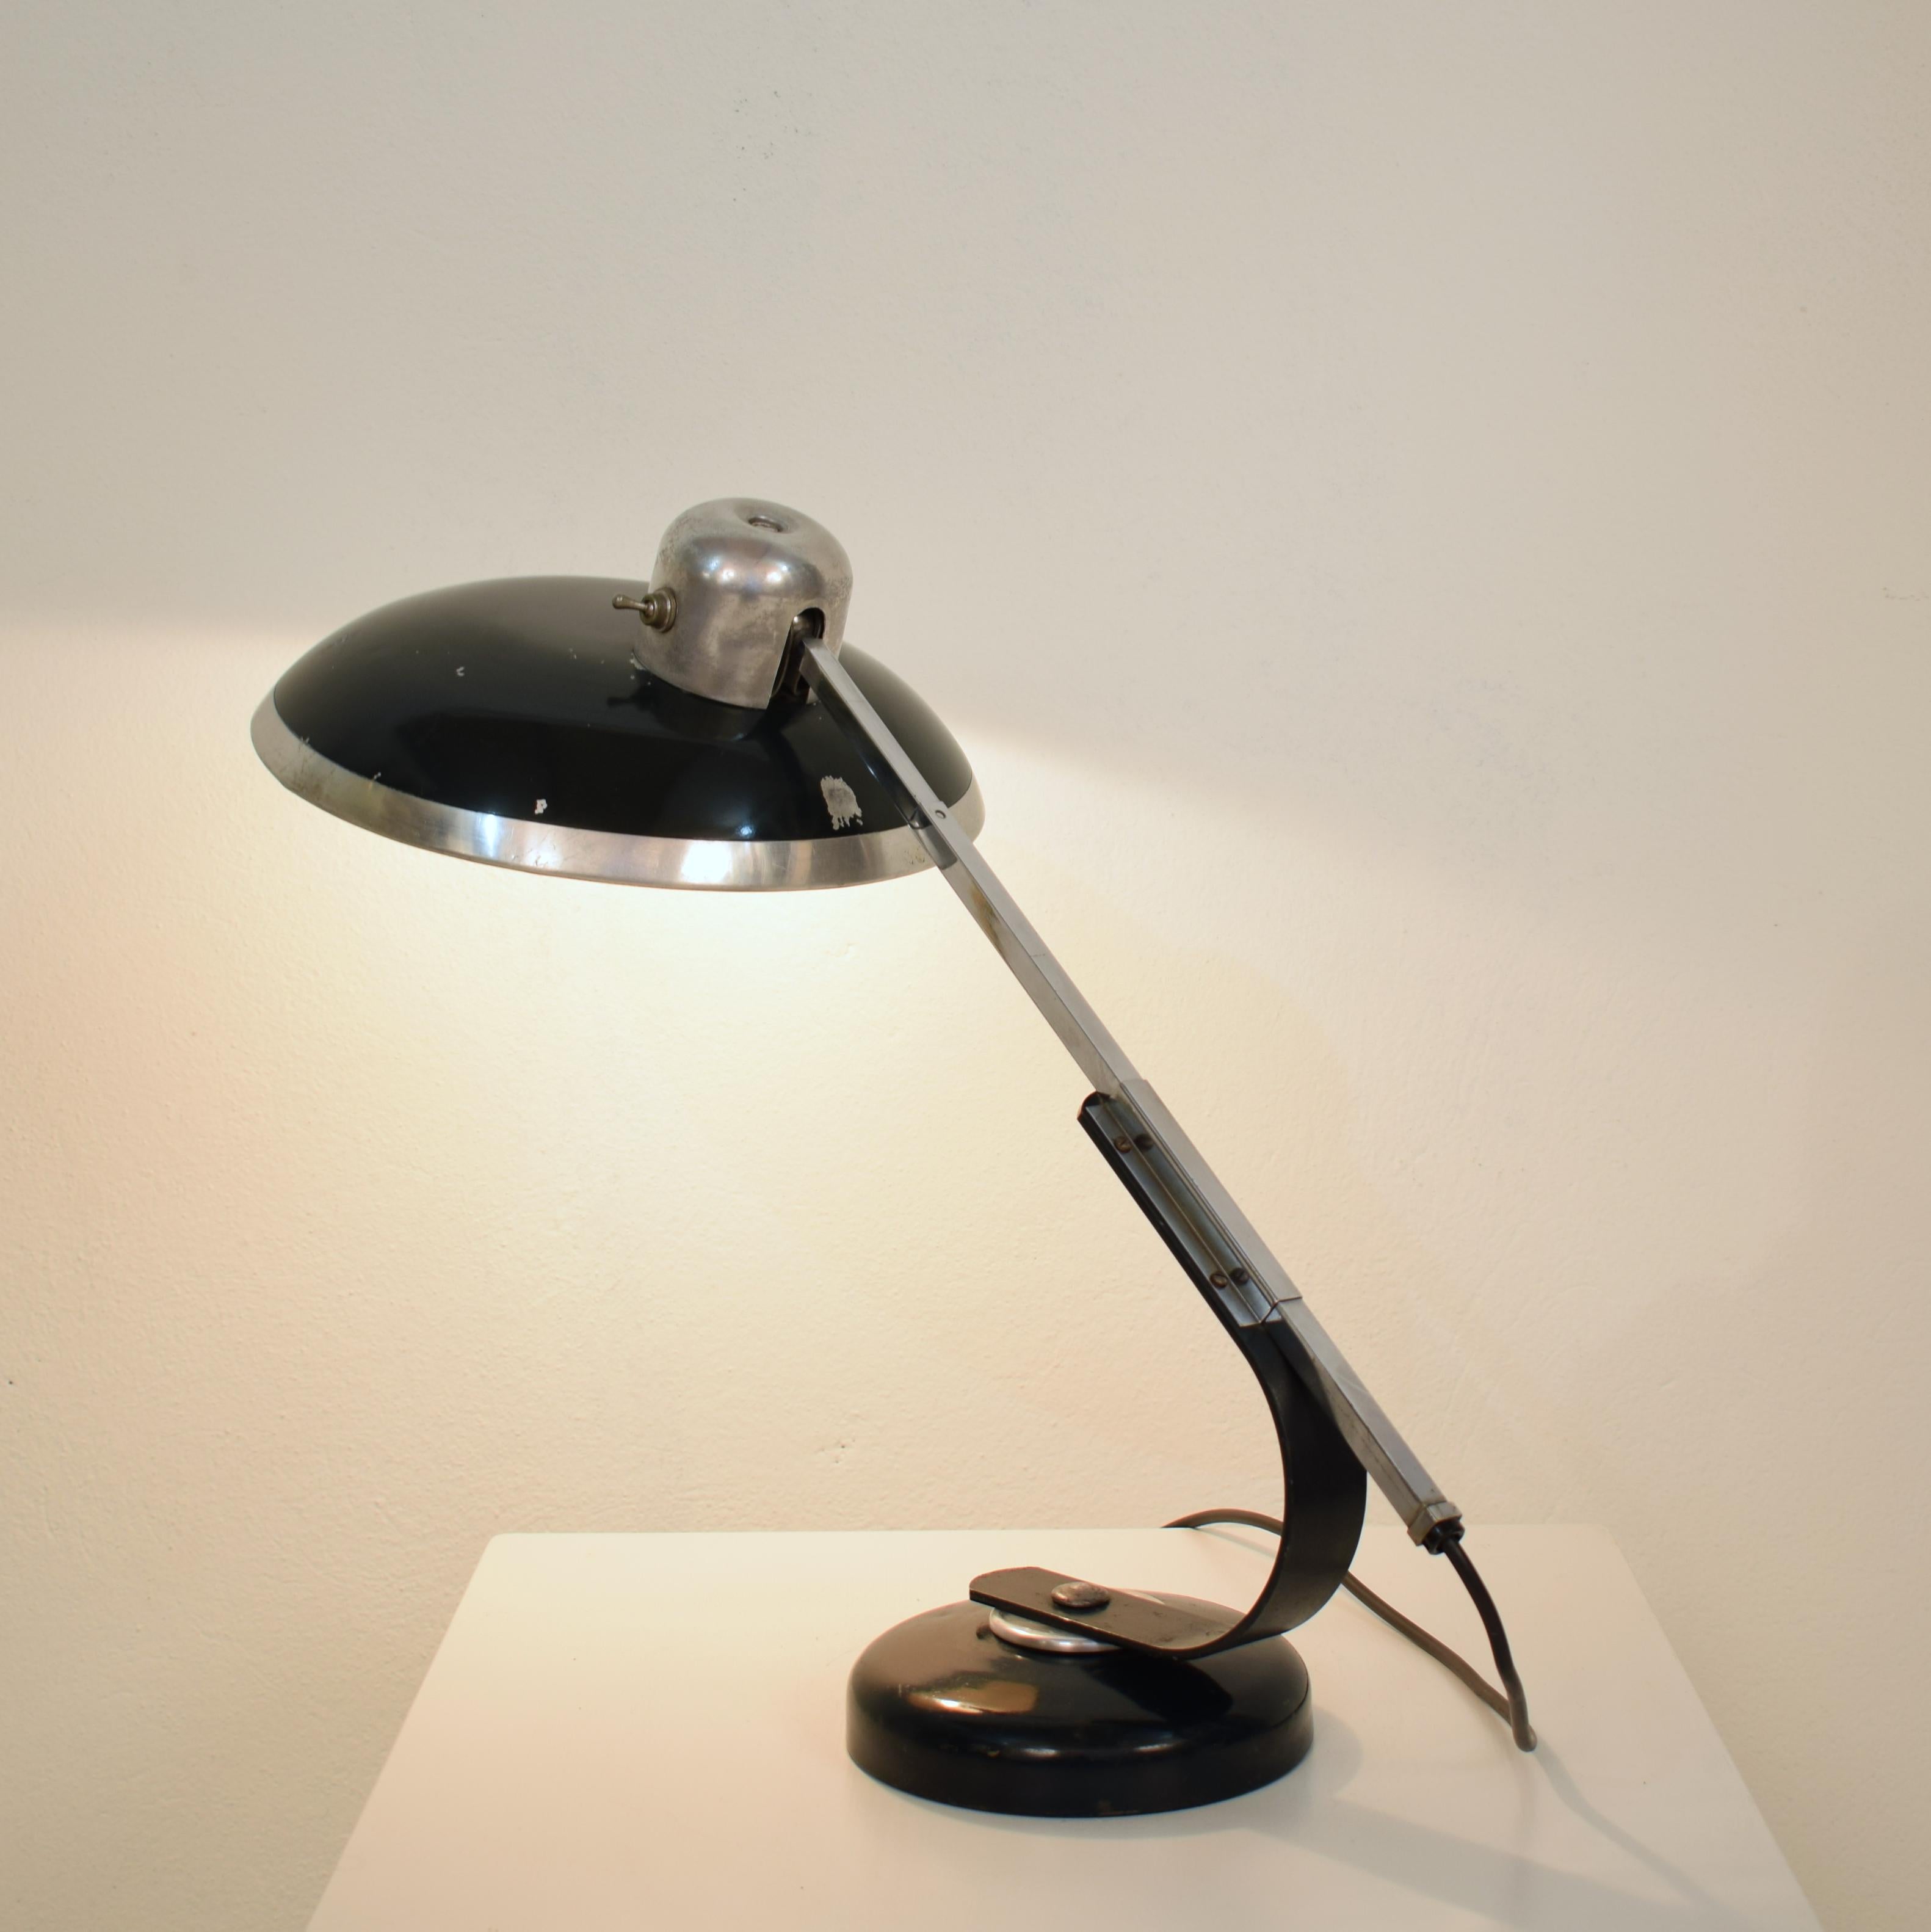 Midcentury Dark Green French Table Lamp with Telescope Function, circa 1945 For Sale 3